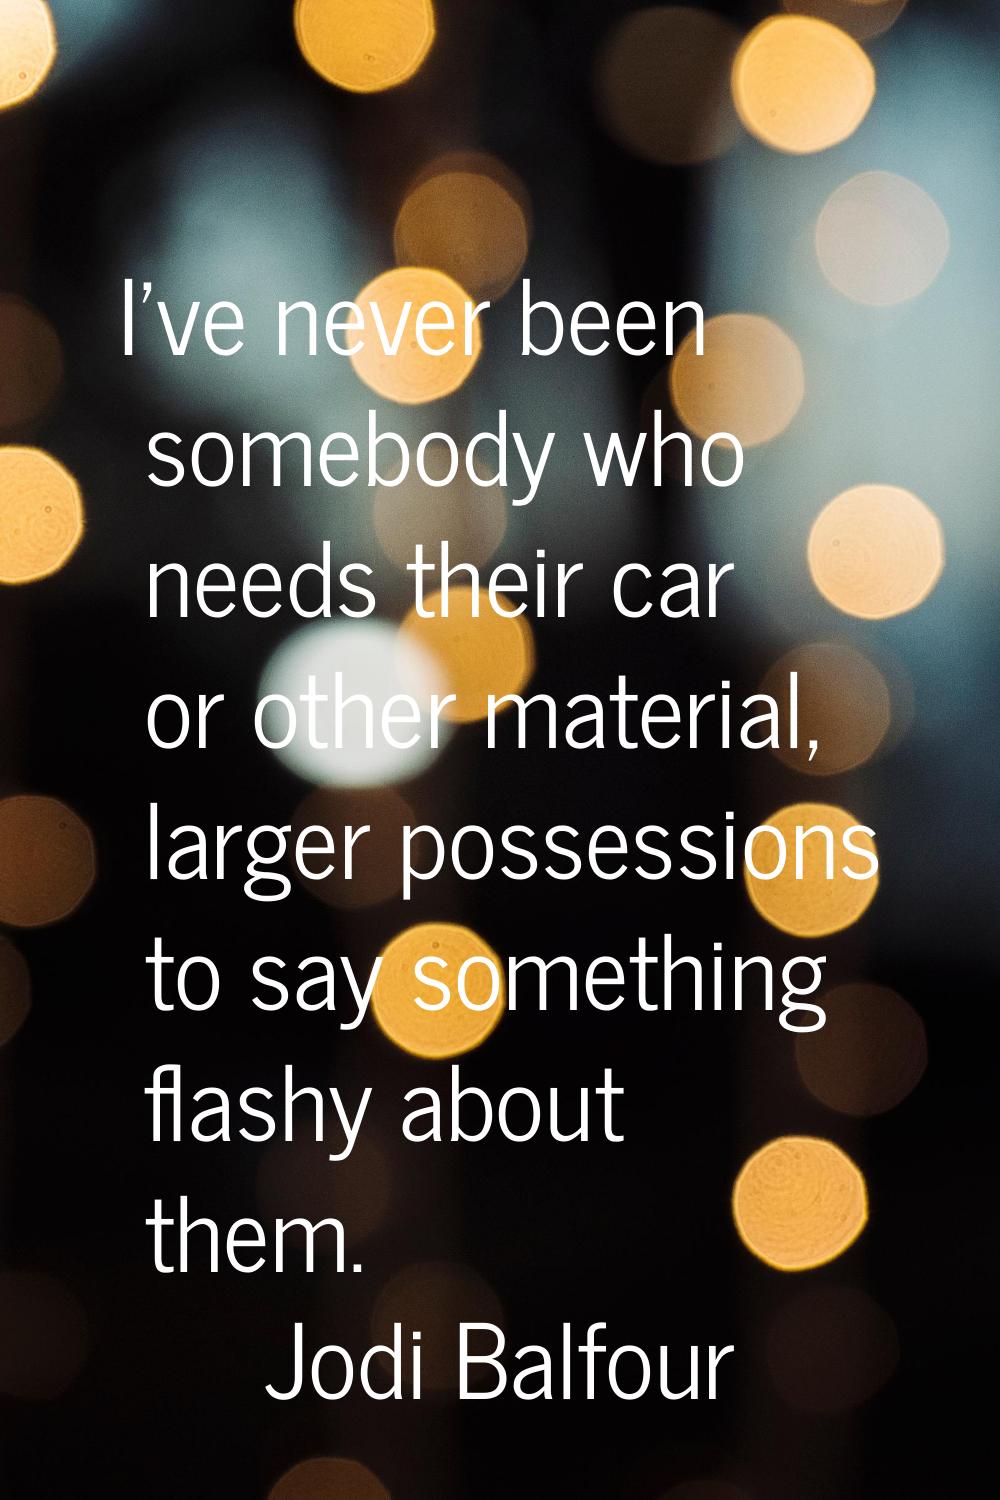 I've never been somebody who needs their car or other material, larger possessions to say something